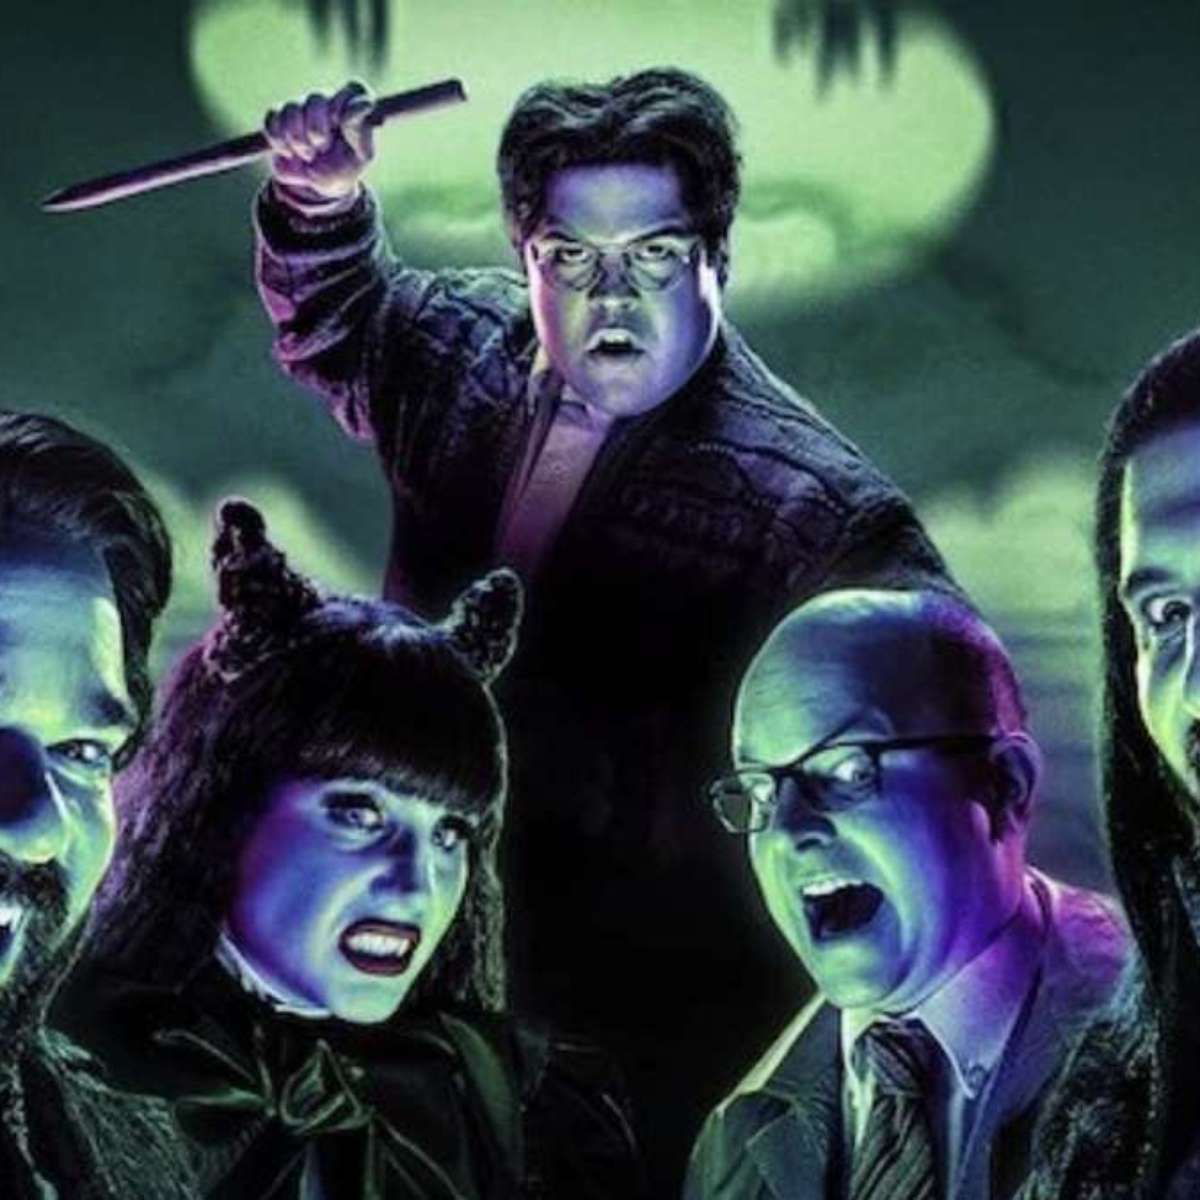 HBO Max - A comédia What We Do in the Shadows, baseada no